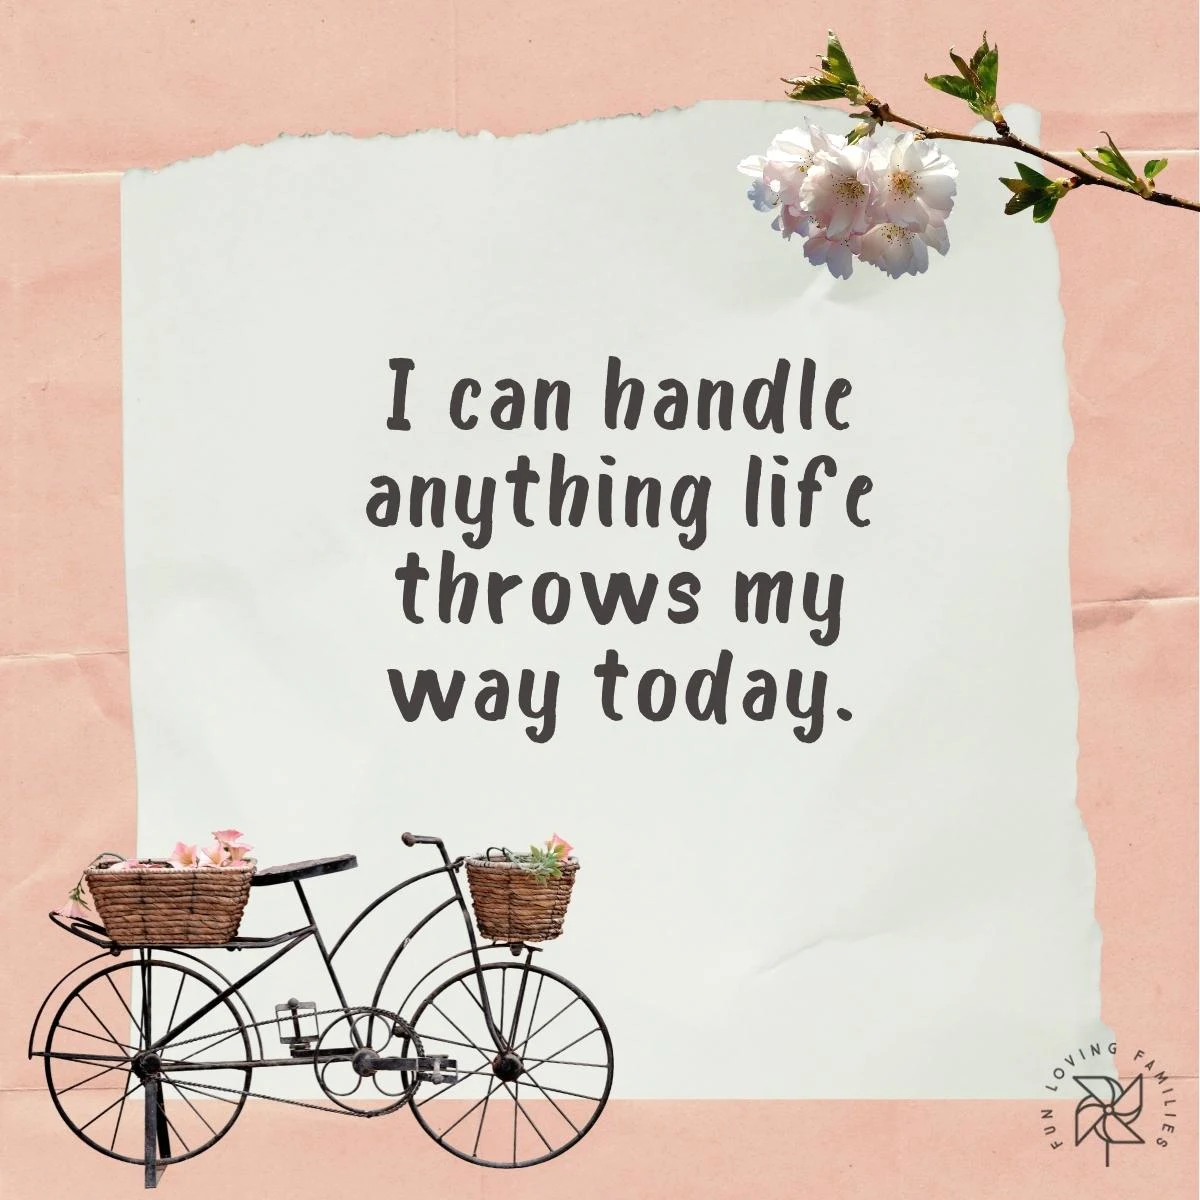 I can handle anything life throws my way today affirmation image